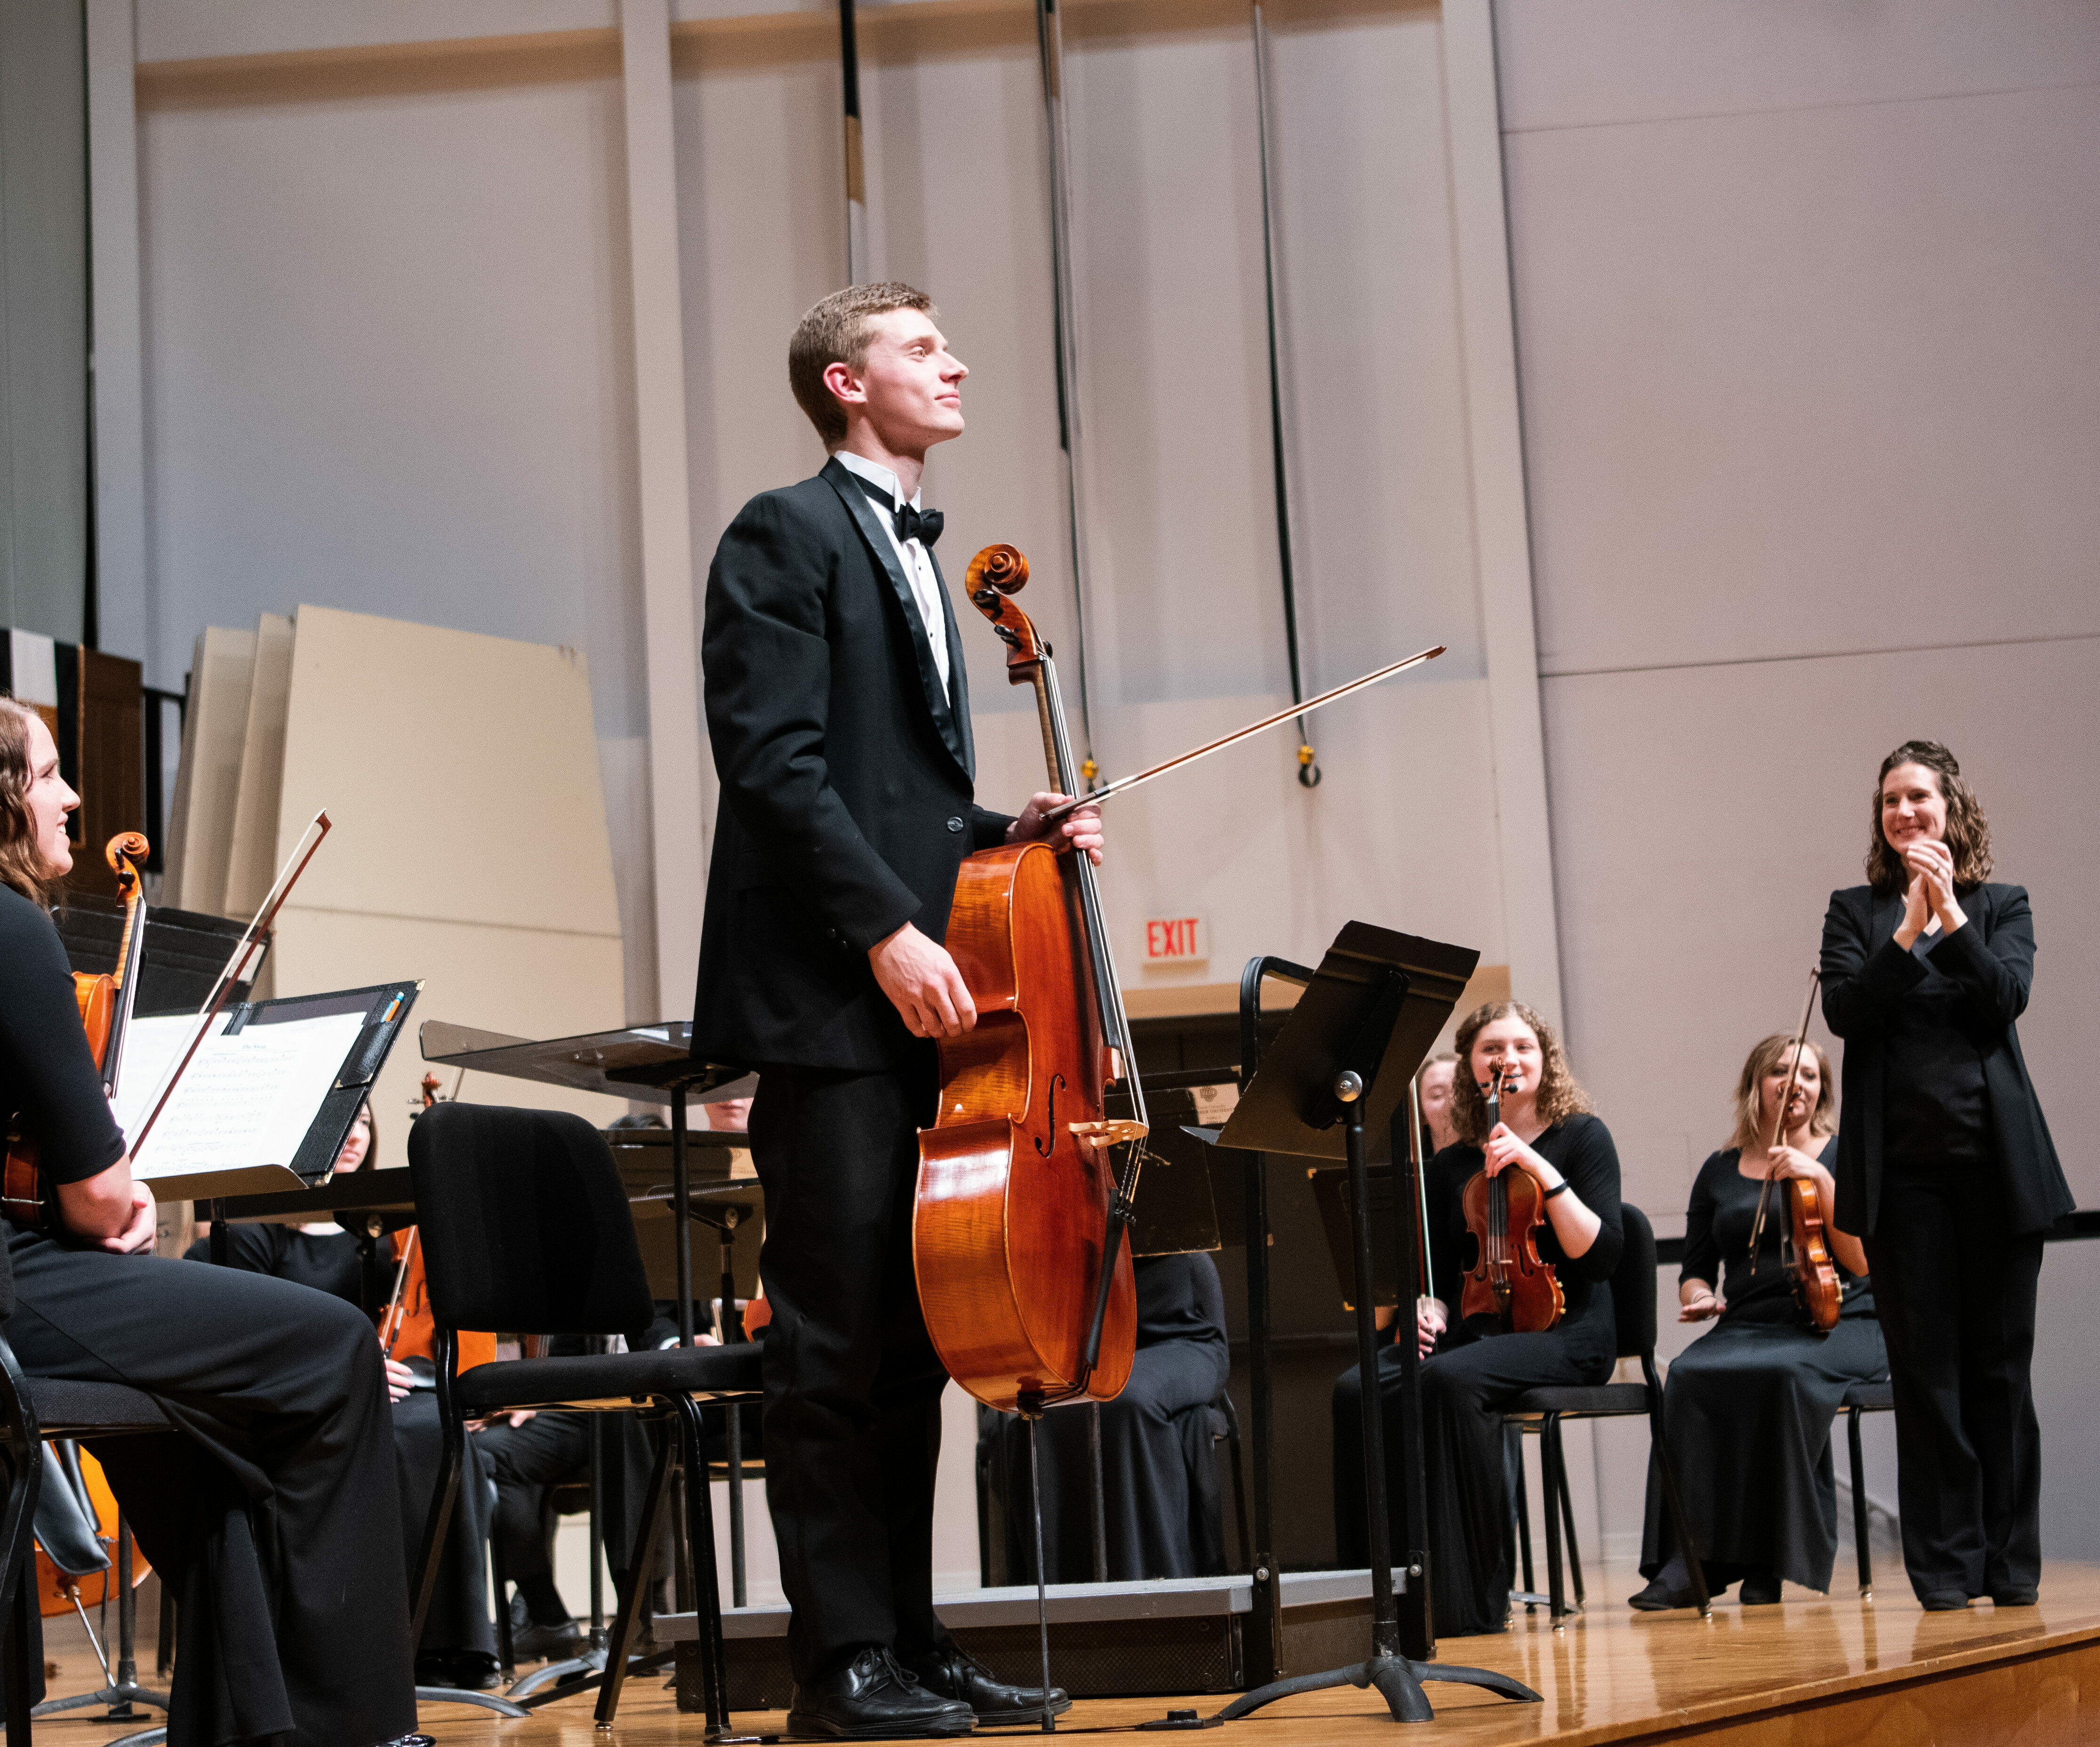 Male cellist stands before the orchestra on stage after completing a solo part